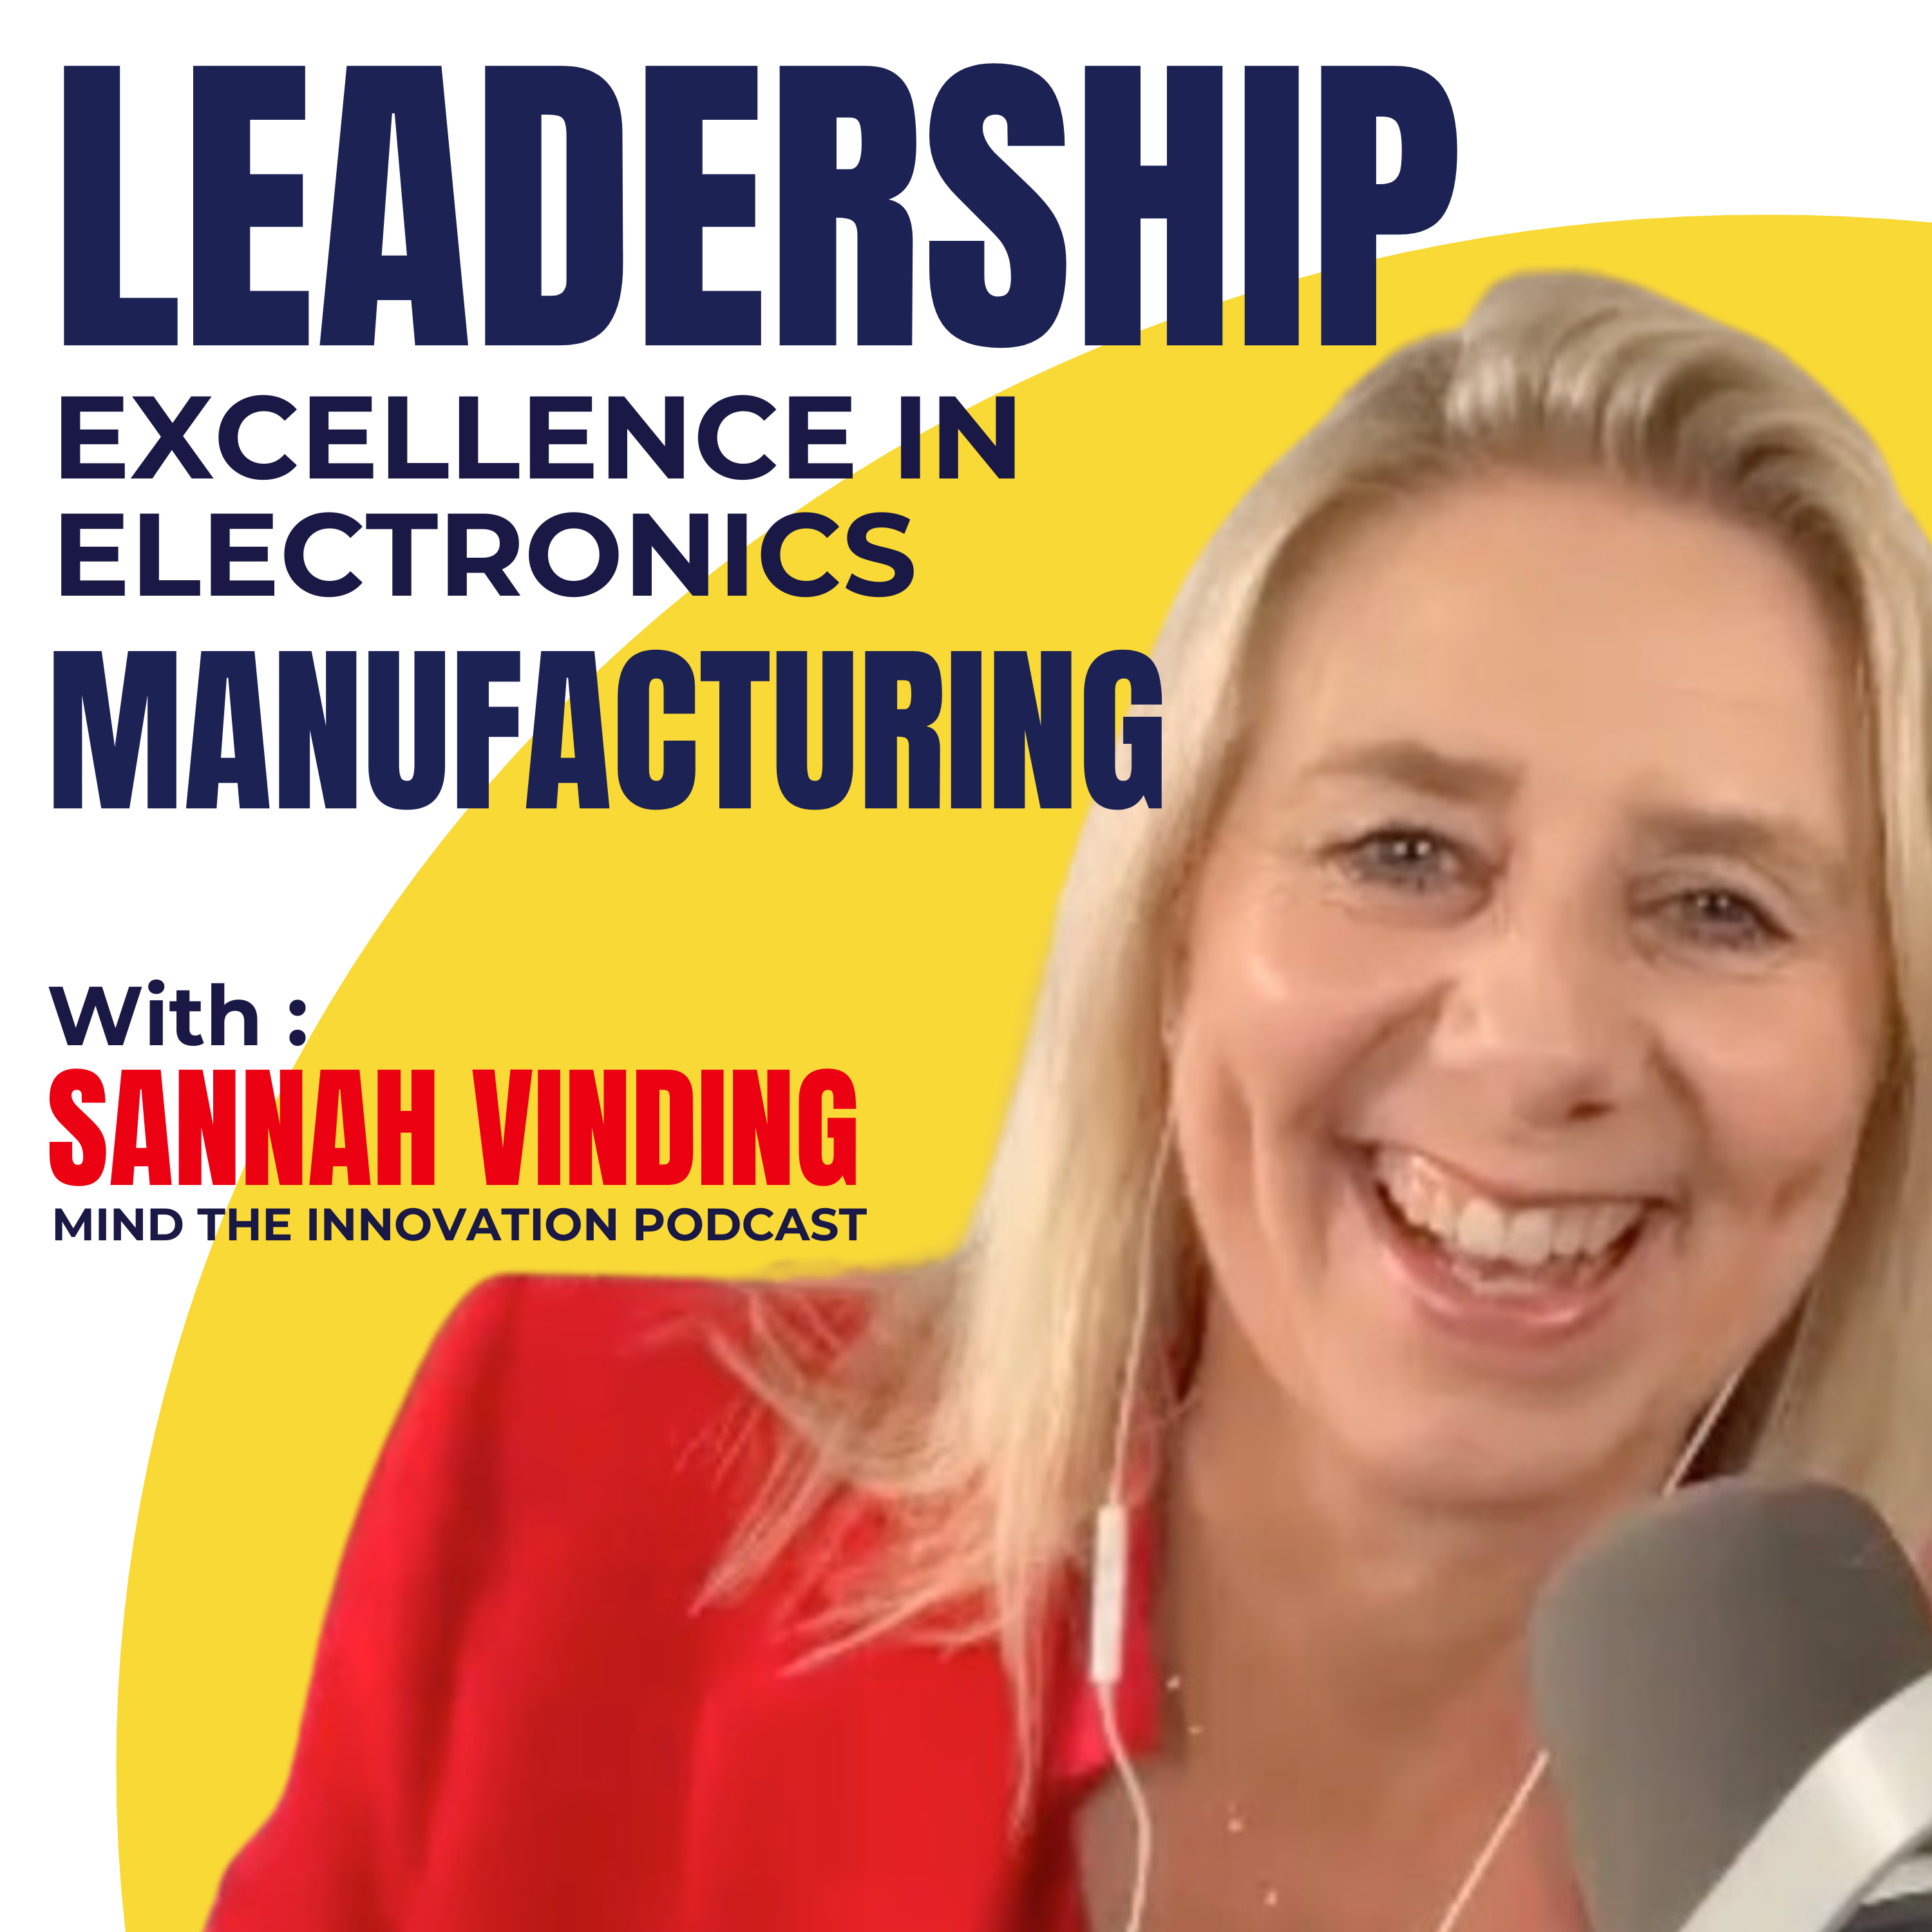 Leadership Excellence in Electronics Manufacturing Podcast - Sannah Vinding